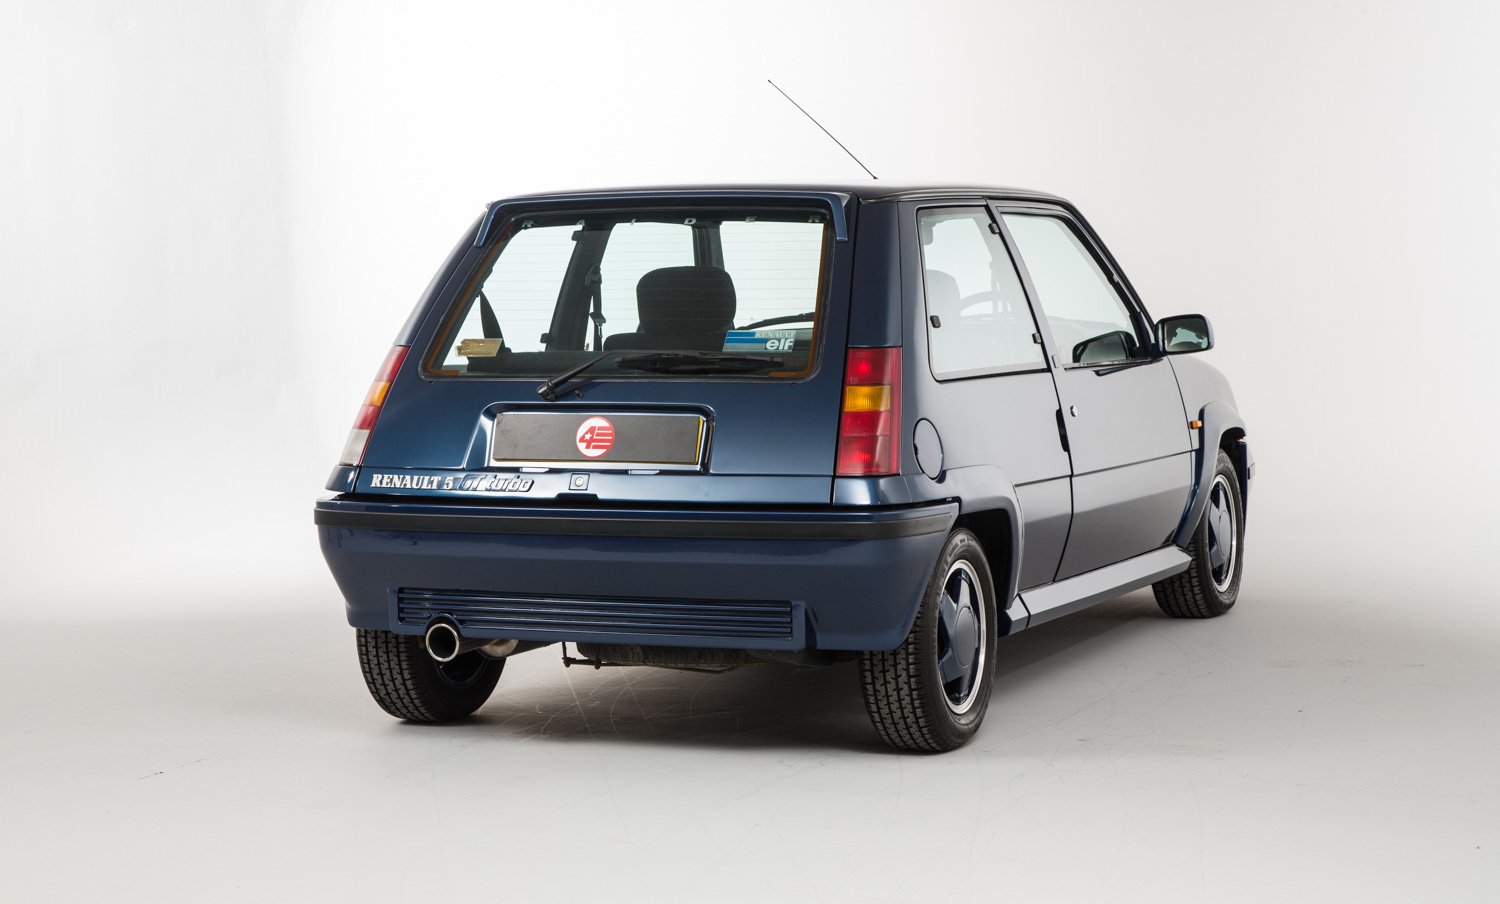 Renault 5 Gt Turbo Uk Spec 1986 Cars French Wallpapers Hd Desktop And Mobile Backgrounds